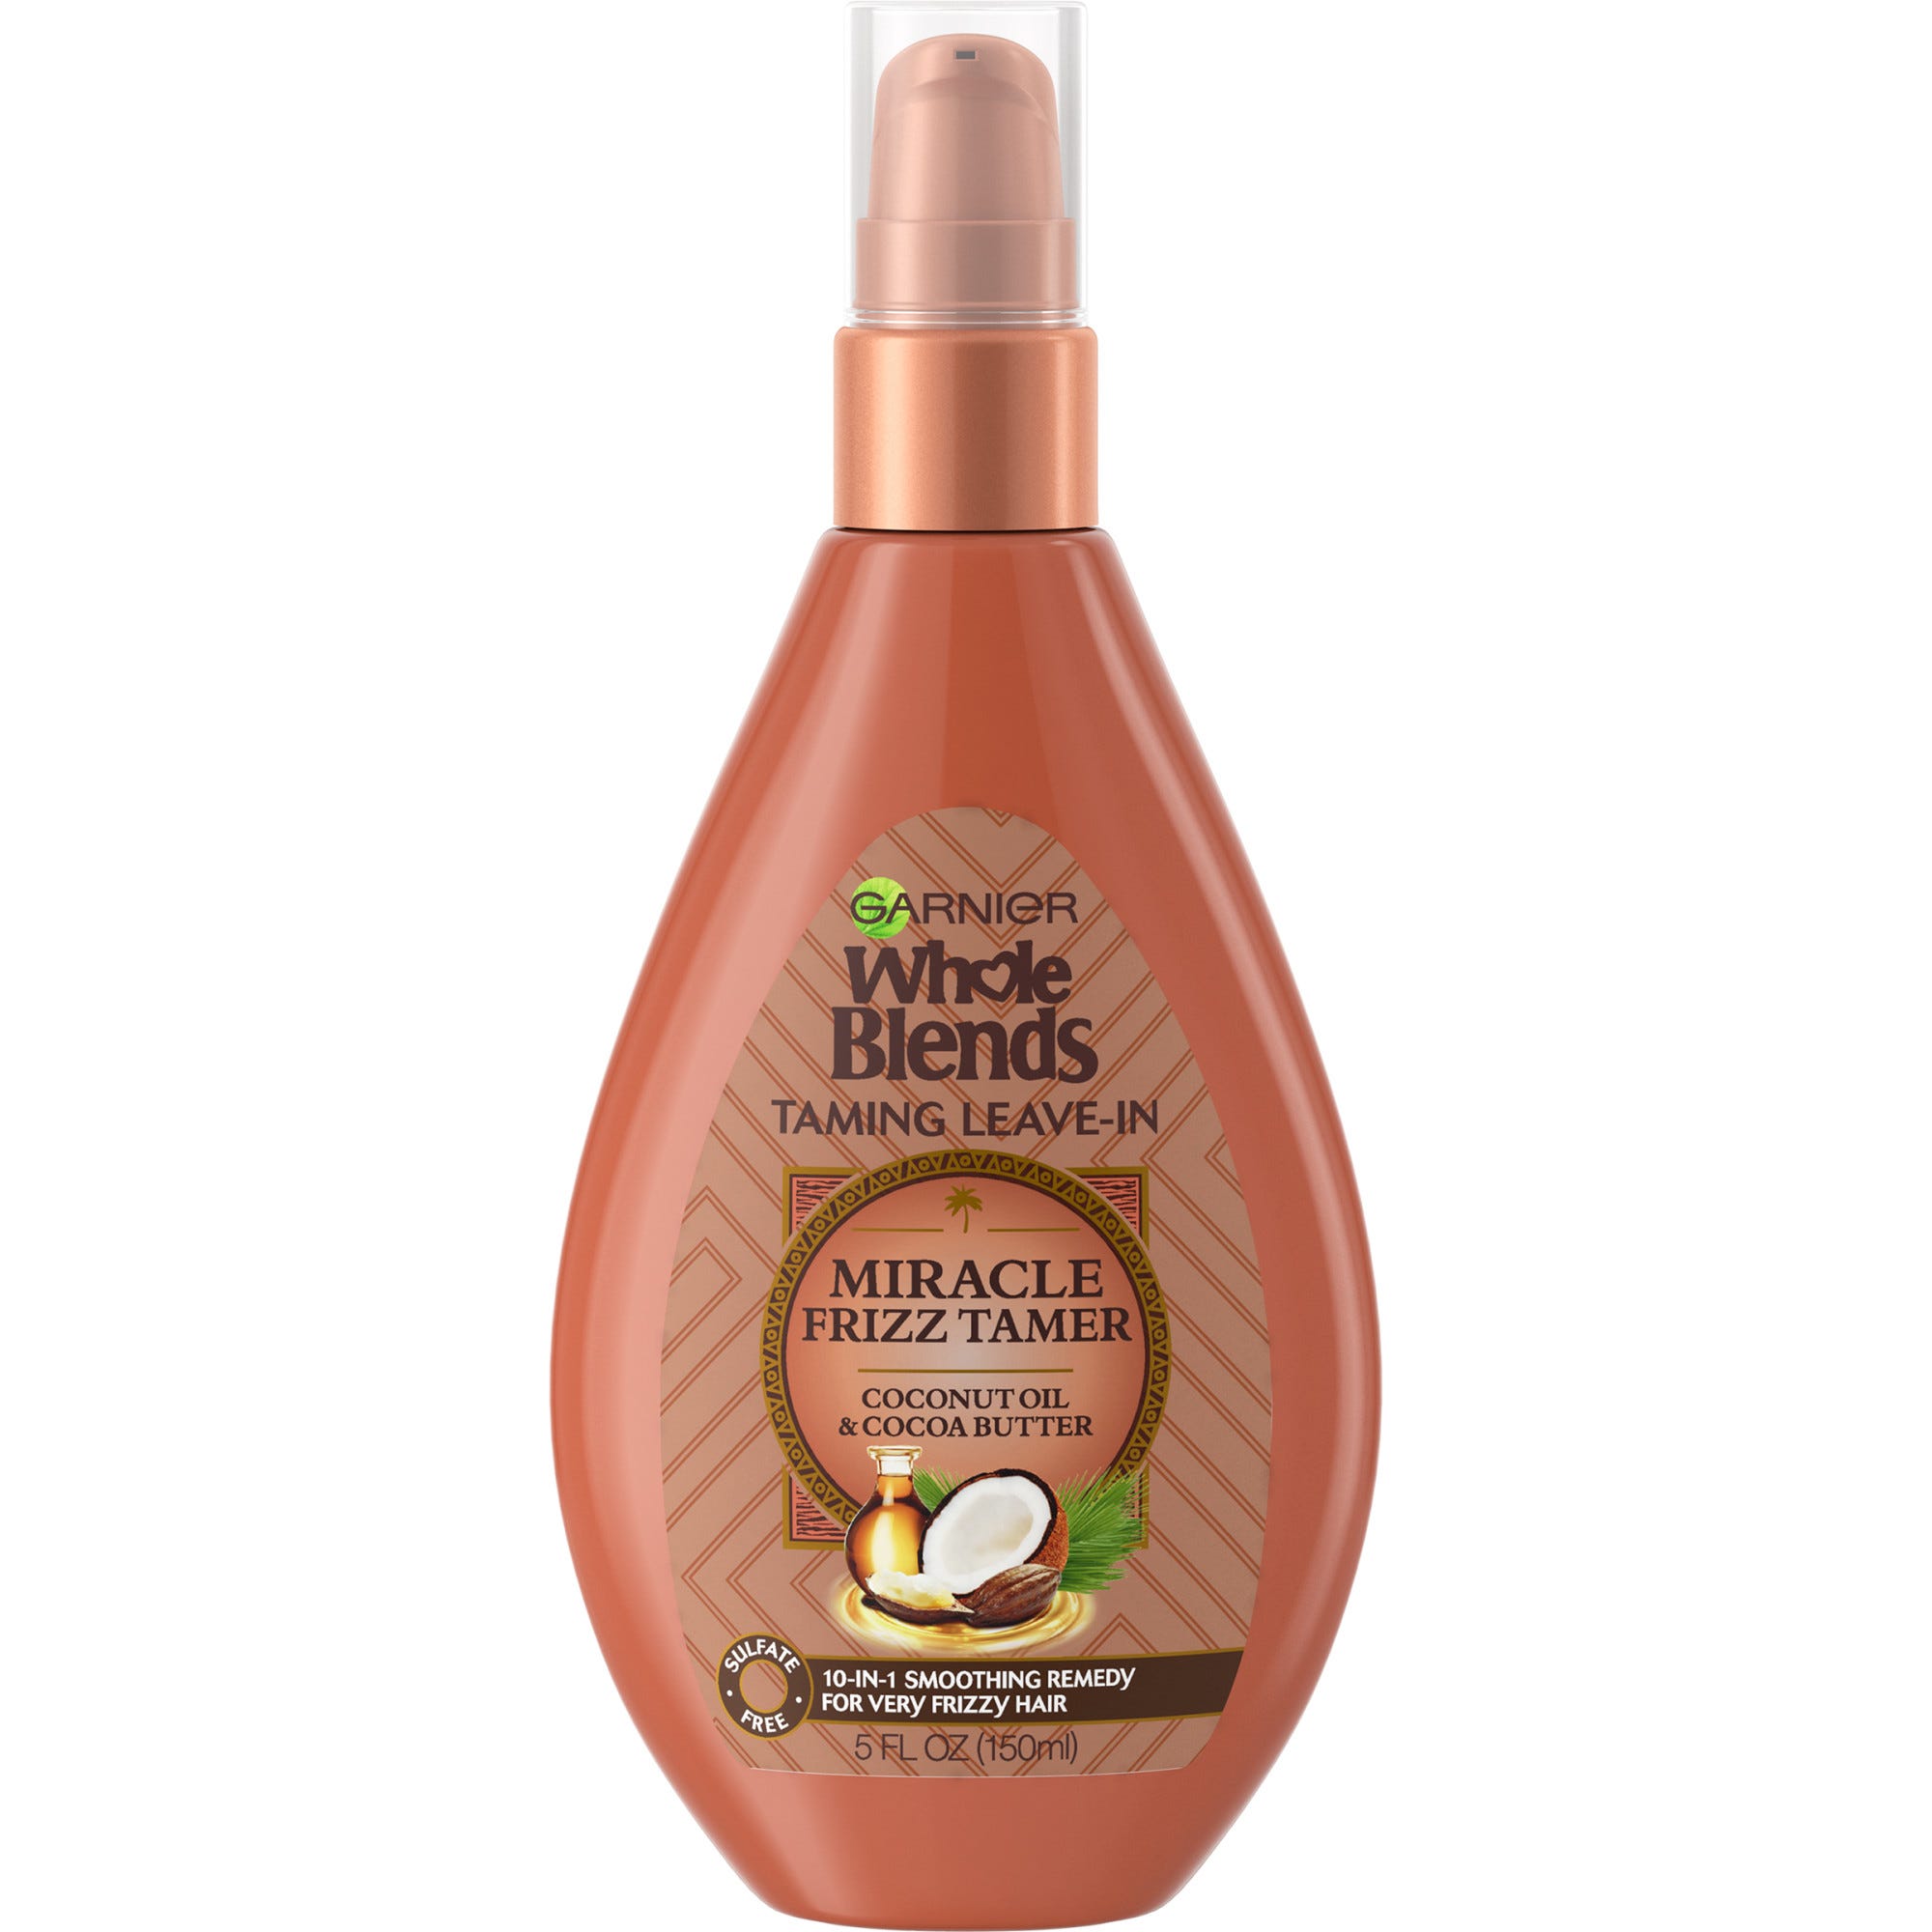 Garnier Whole Blends Miracle Frizz Tamer 10-in-1 Coconut Leave-In Treatment - 5 fl oz